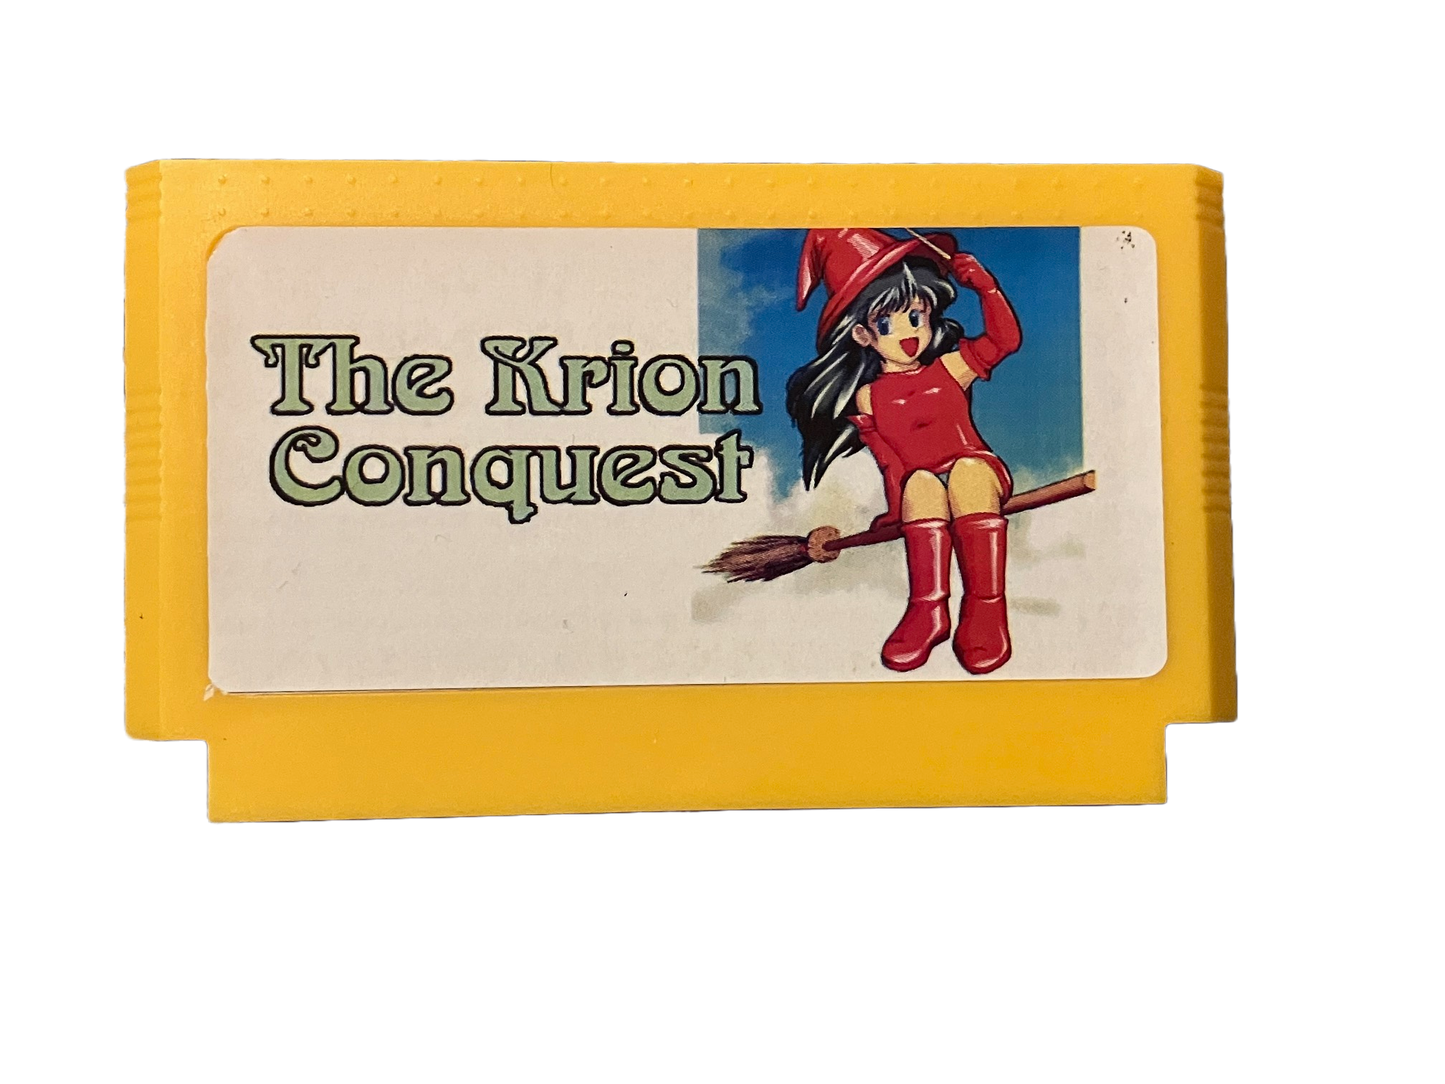 The Krion Conquest Japanese Nintendo Famicom Video Game